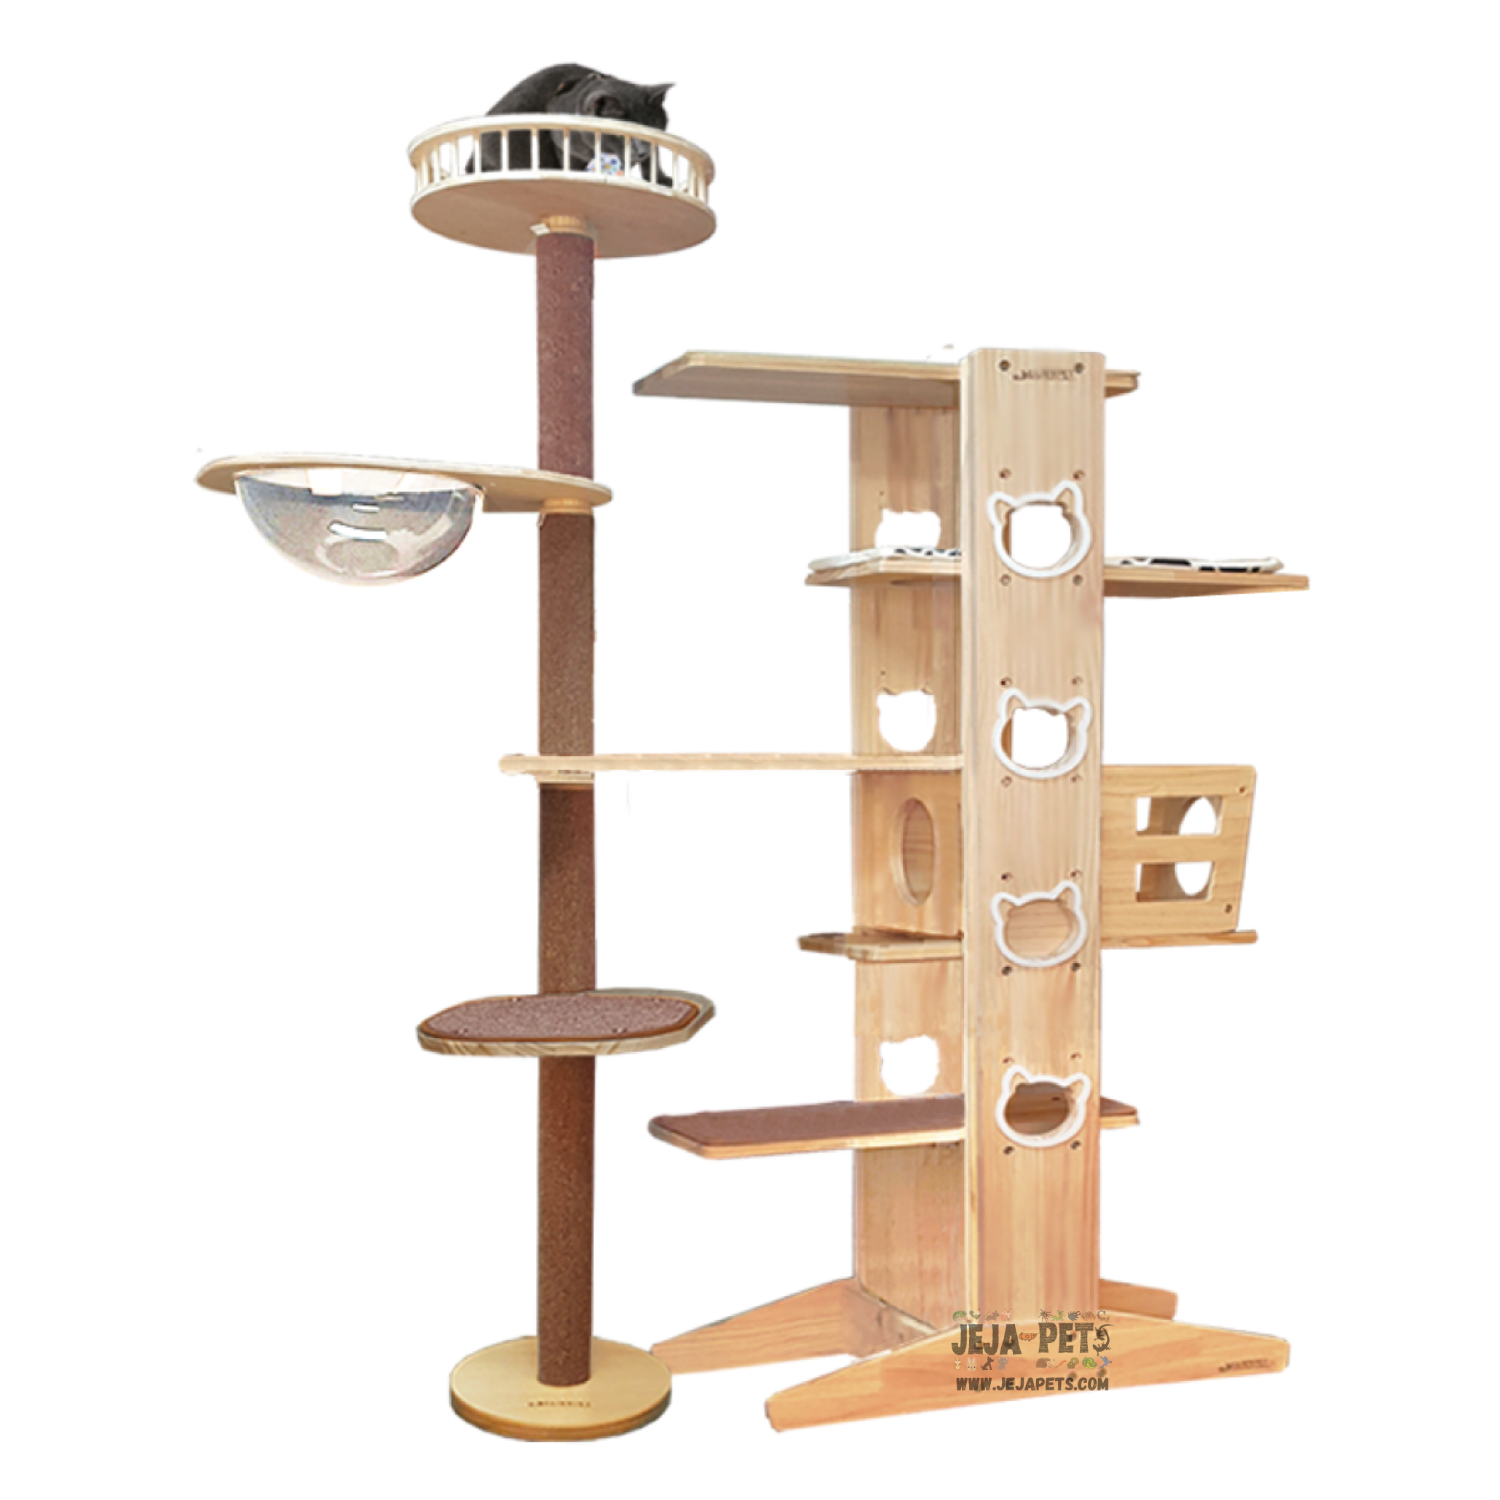 [DISCONTINUED] Luxypet Aaron 5-3 Tower Set 2 Transparent Cat Condo - 76 x 34 x 160 cm